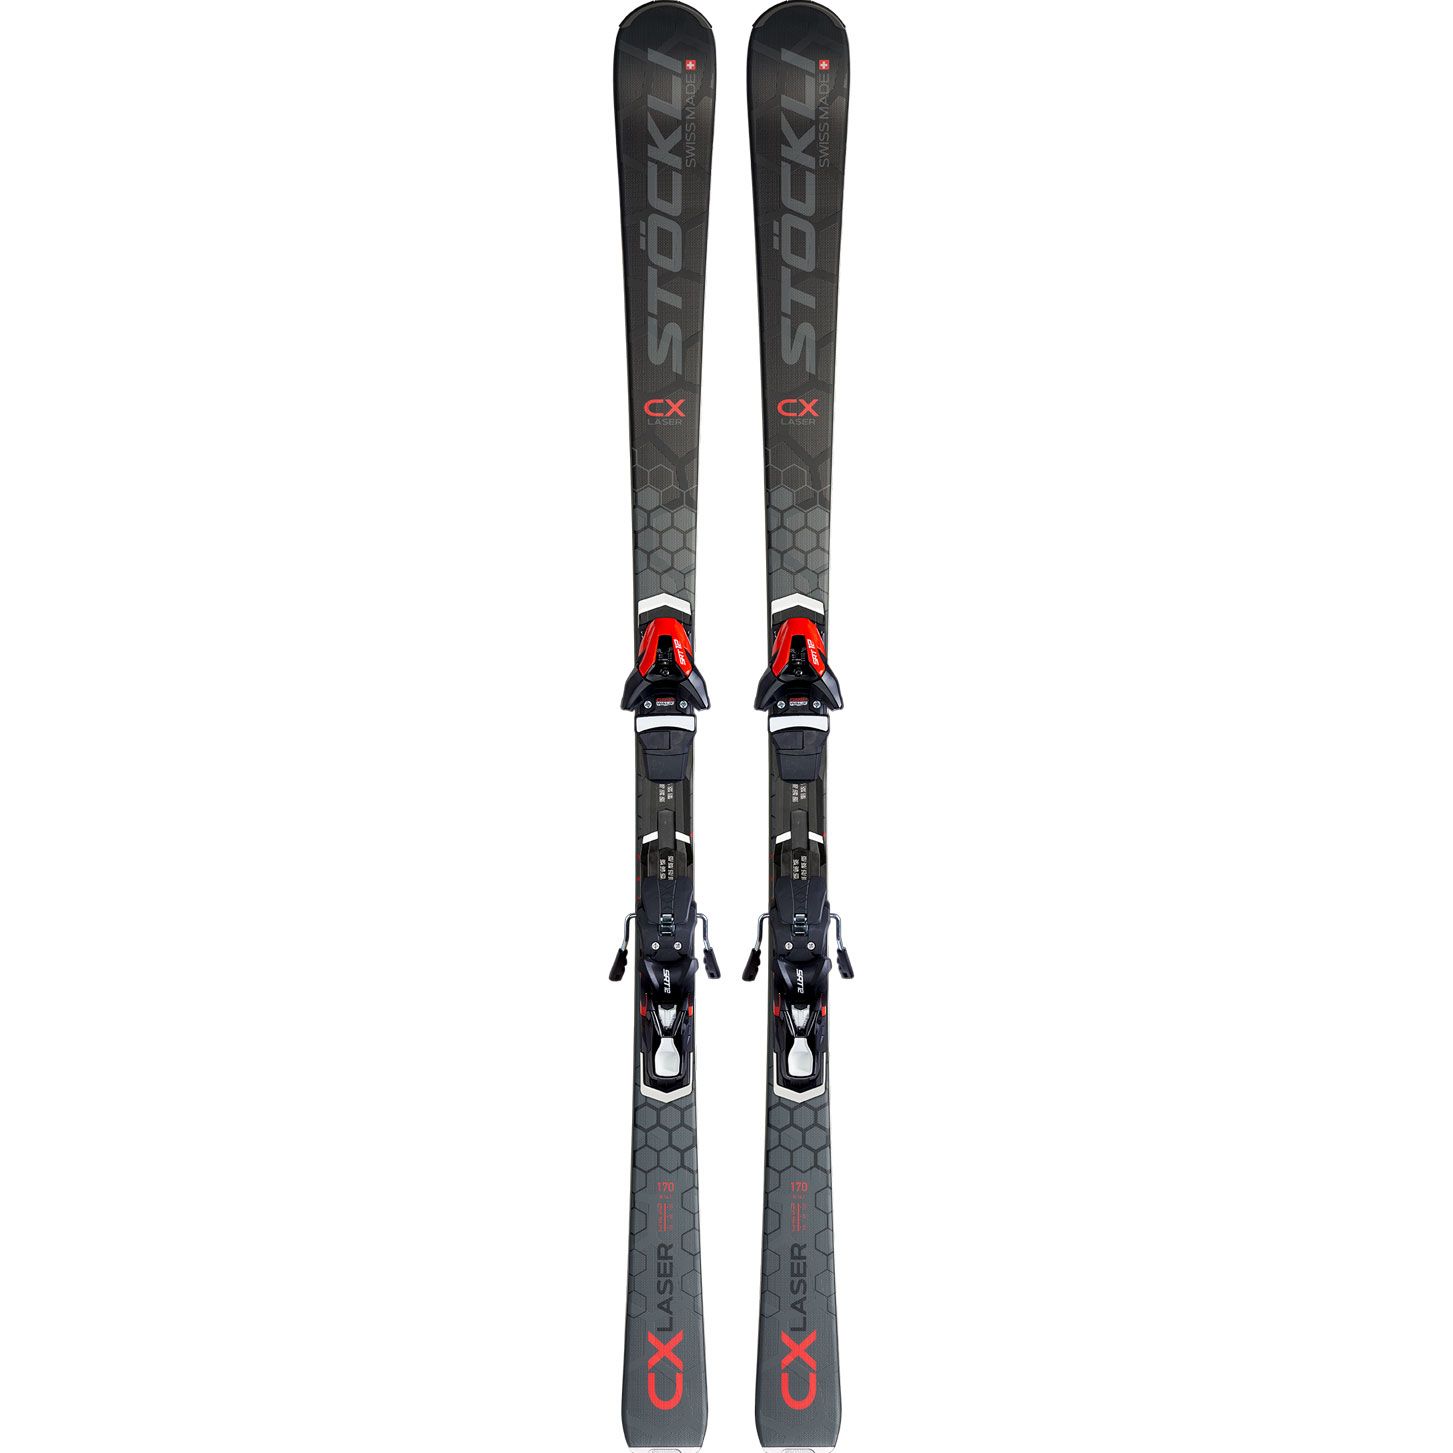 Pack skis Laser Cx 2022 + Fixations Mc 12